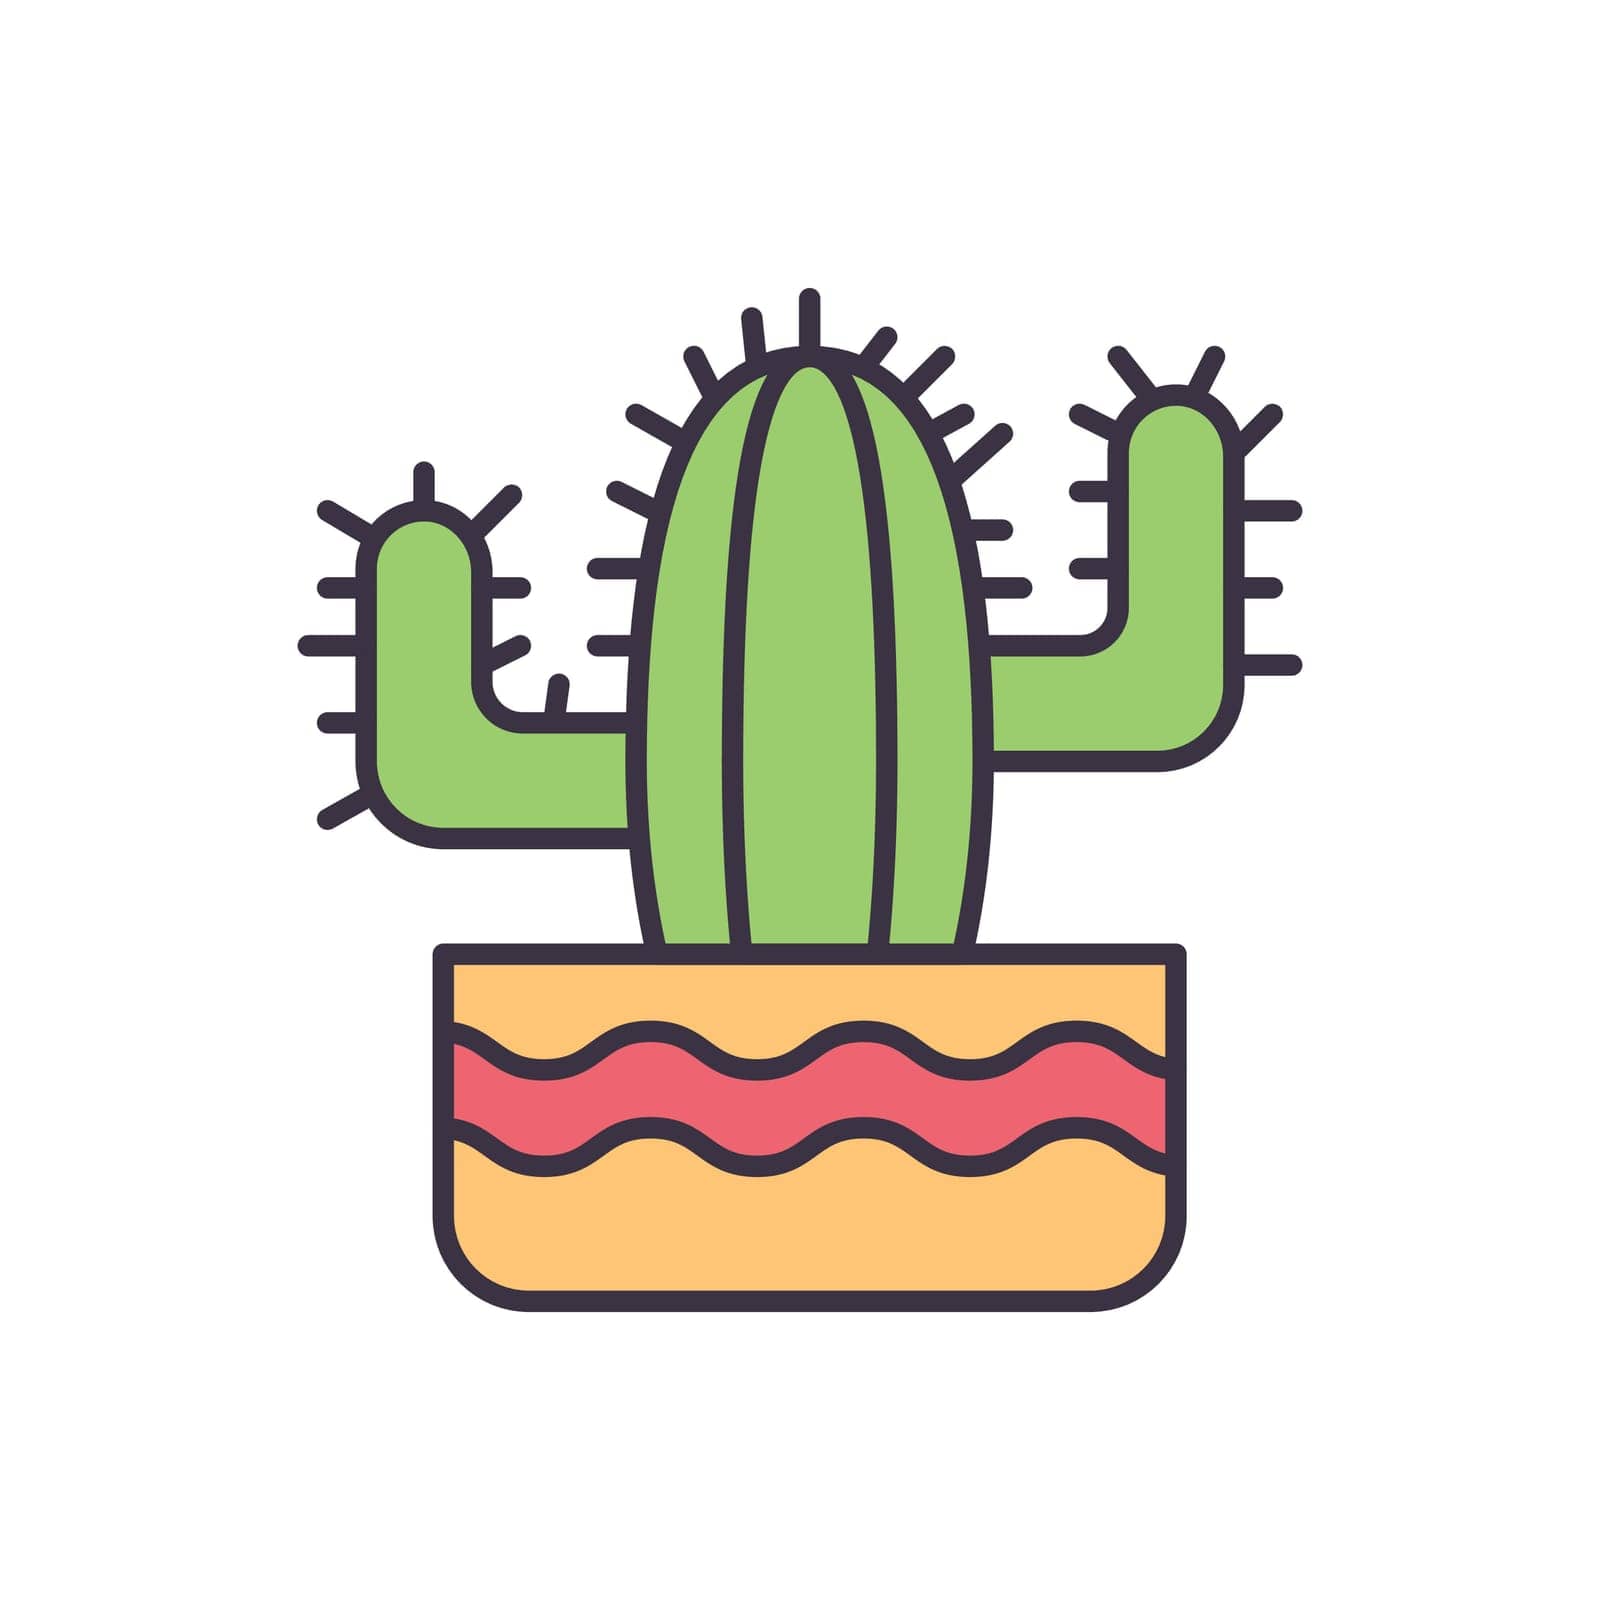 Cactus related vector icon. Isolated on white background. Vector illustration